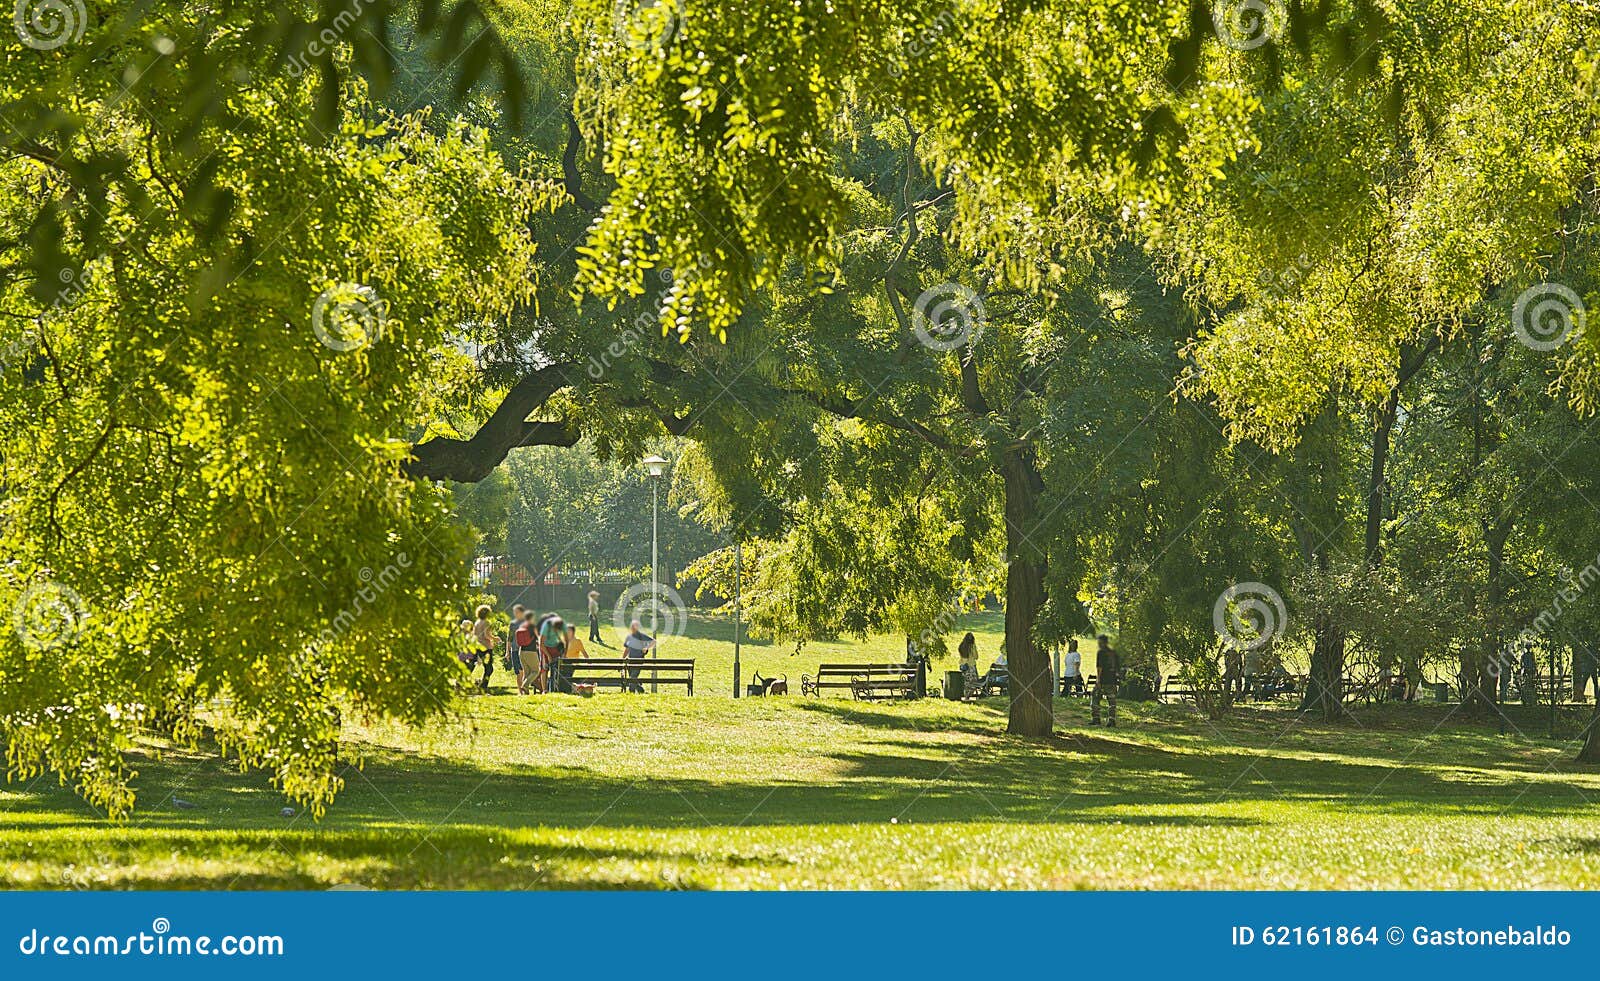 Vrchlickeho Sady Recreation Park in Prague Stock Photo - Image of peace ...